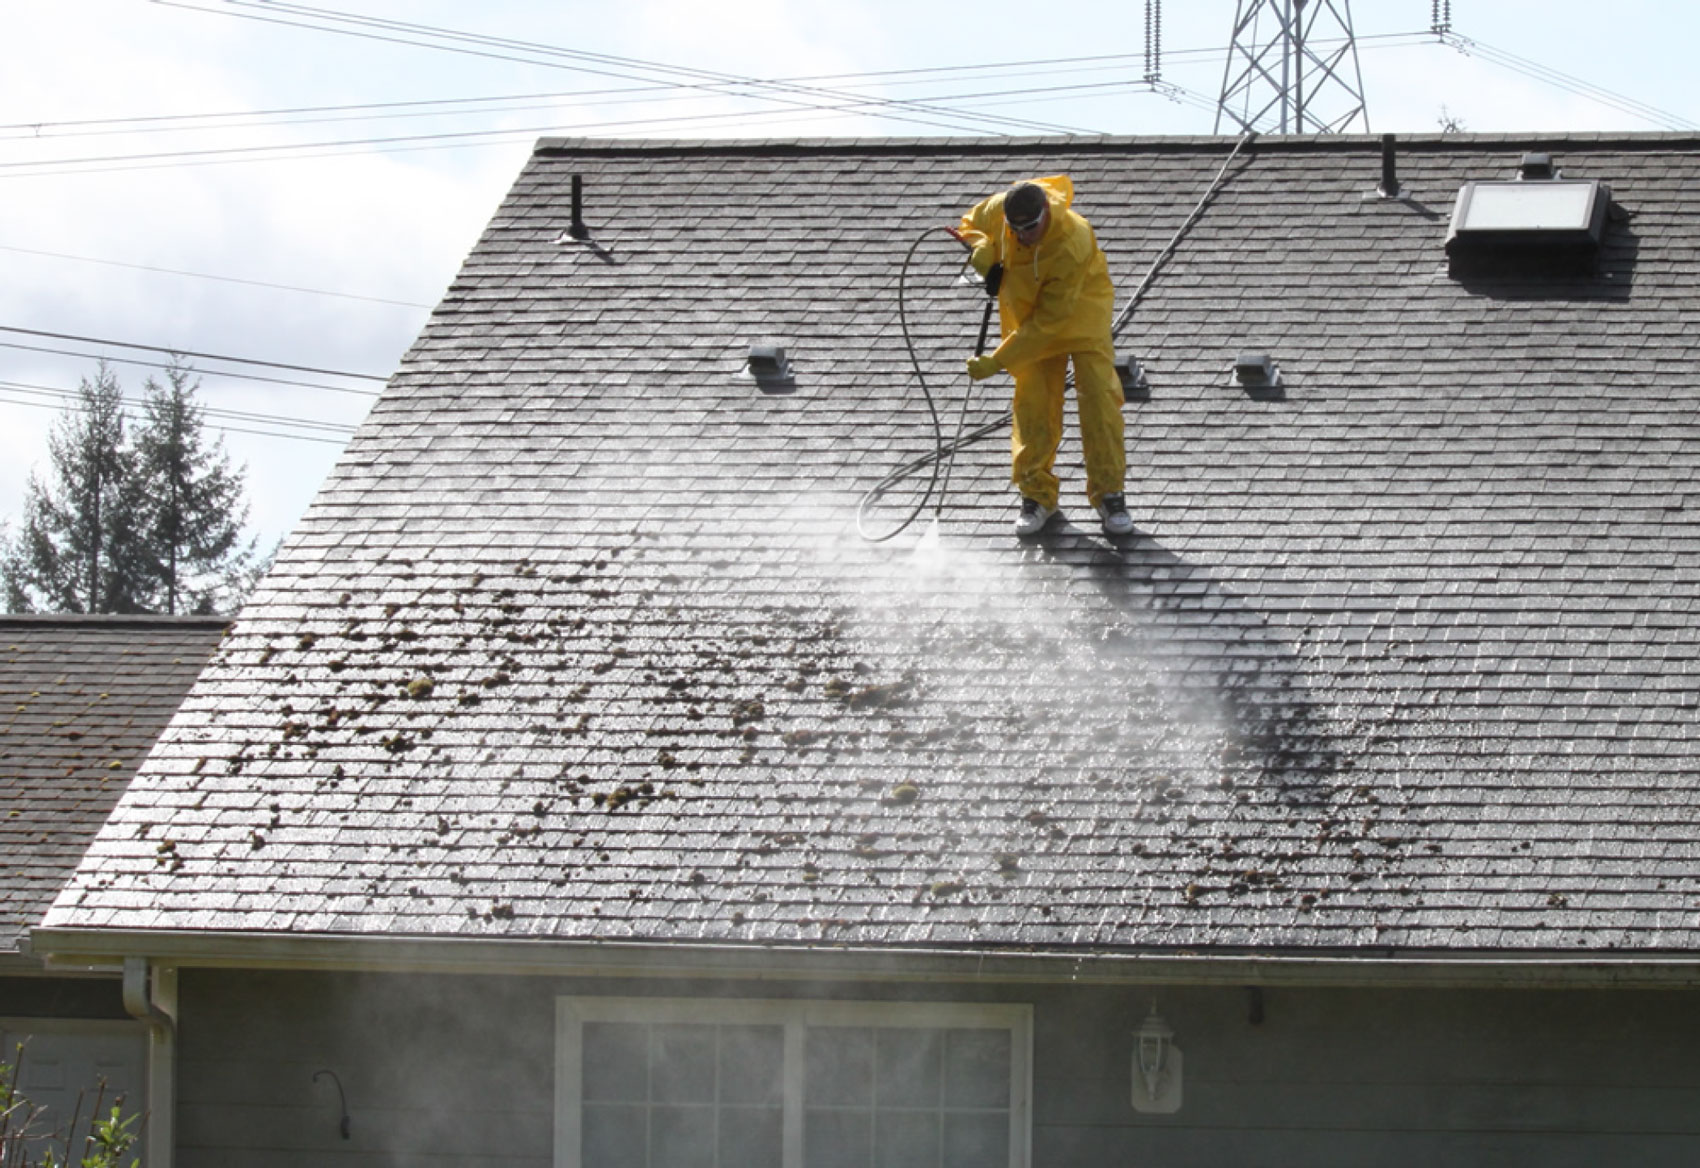 Why Not Pressure Wash Your Cedar or Shingle Roof